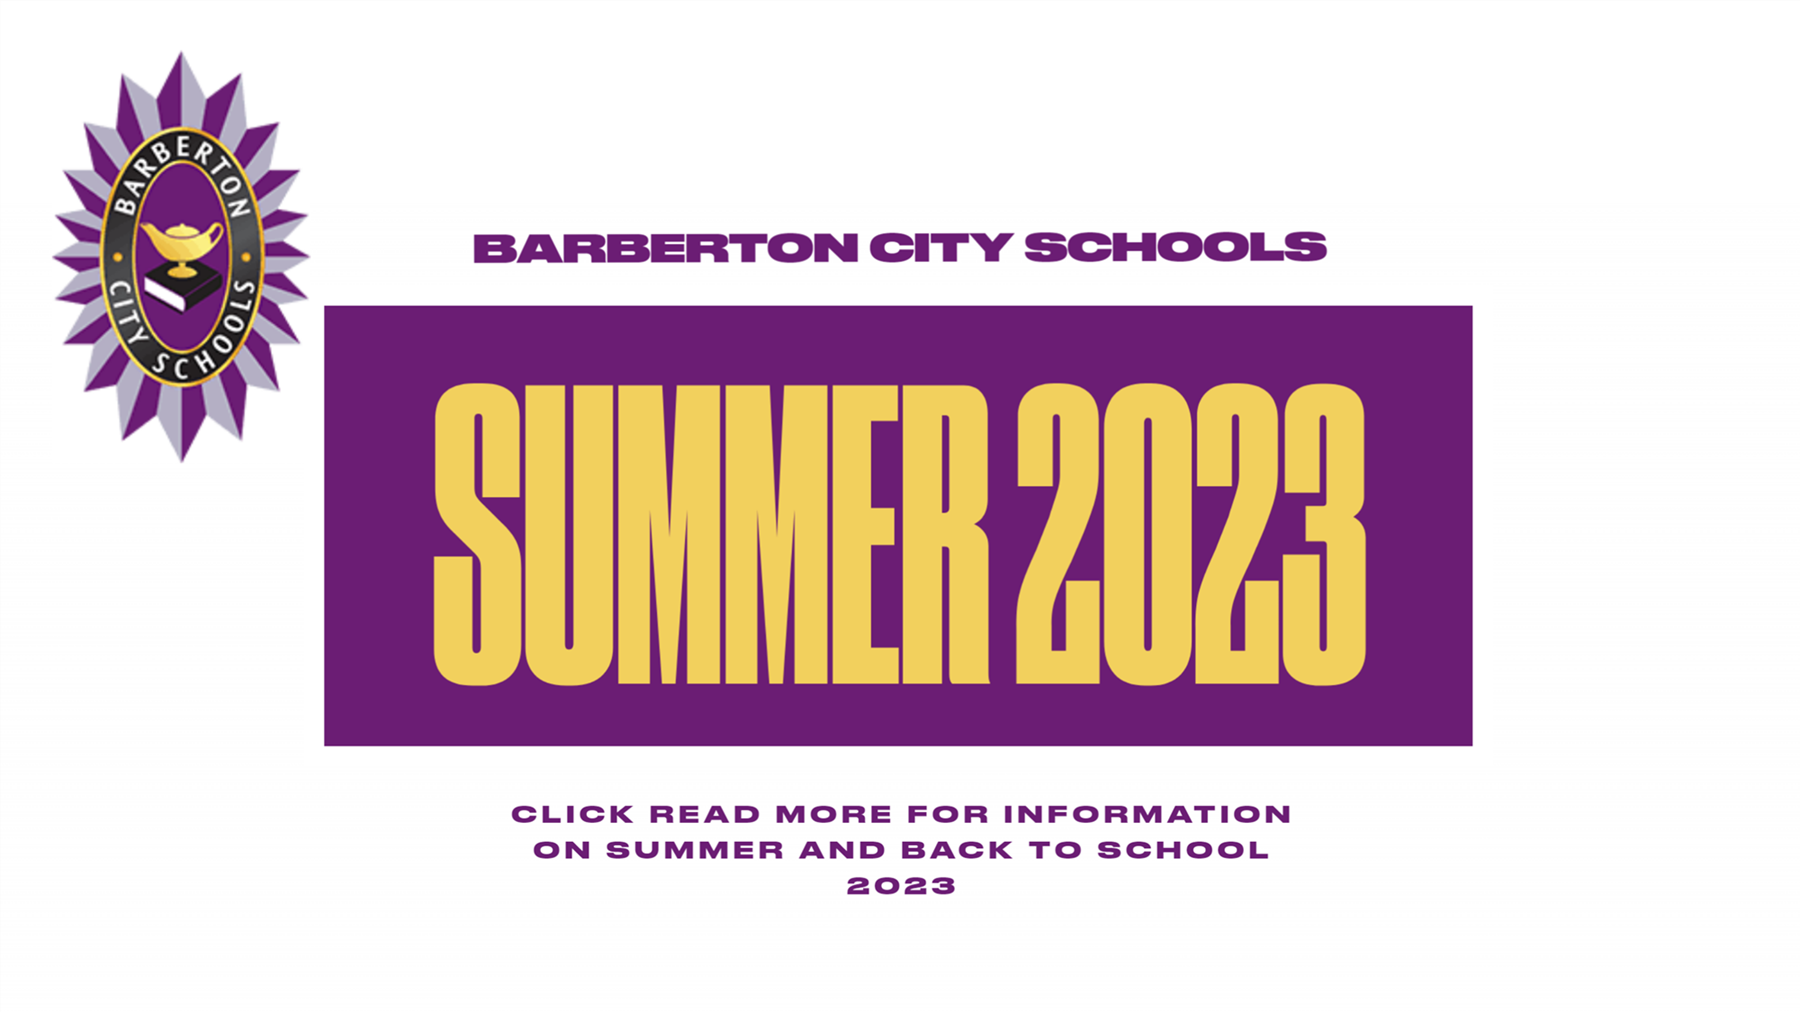 Summer and Back to School Information